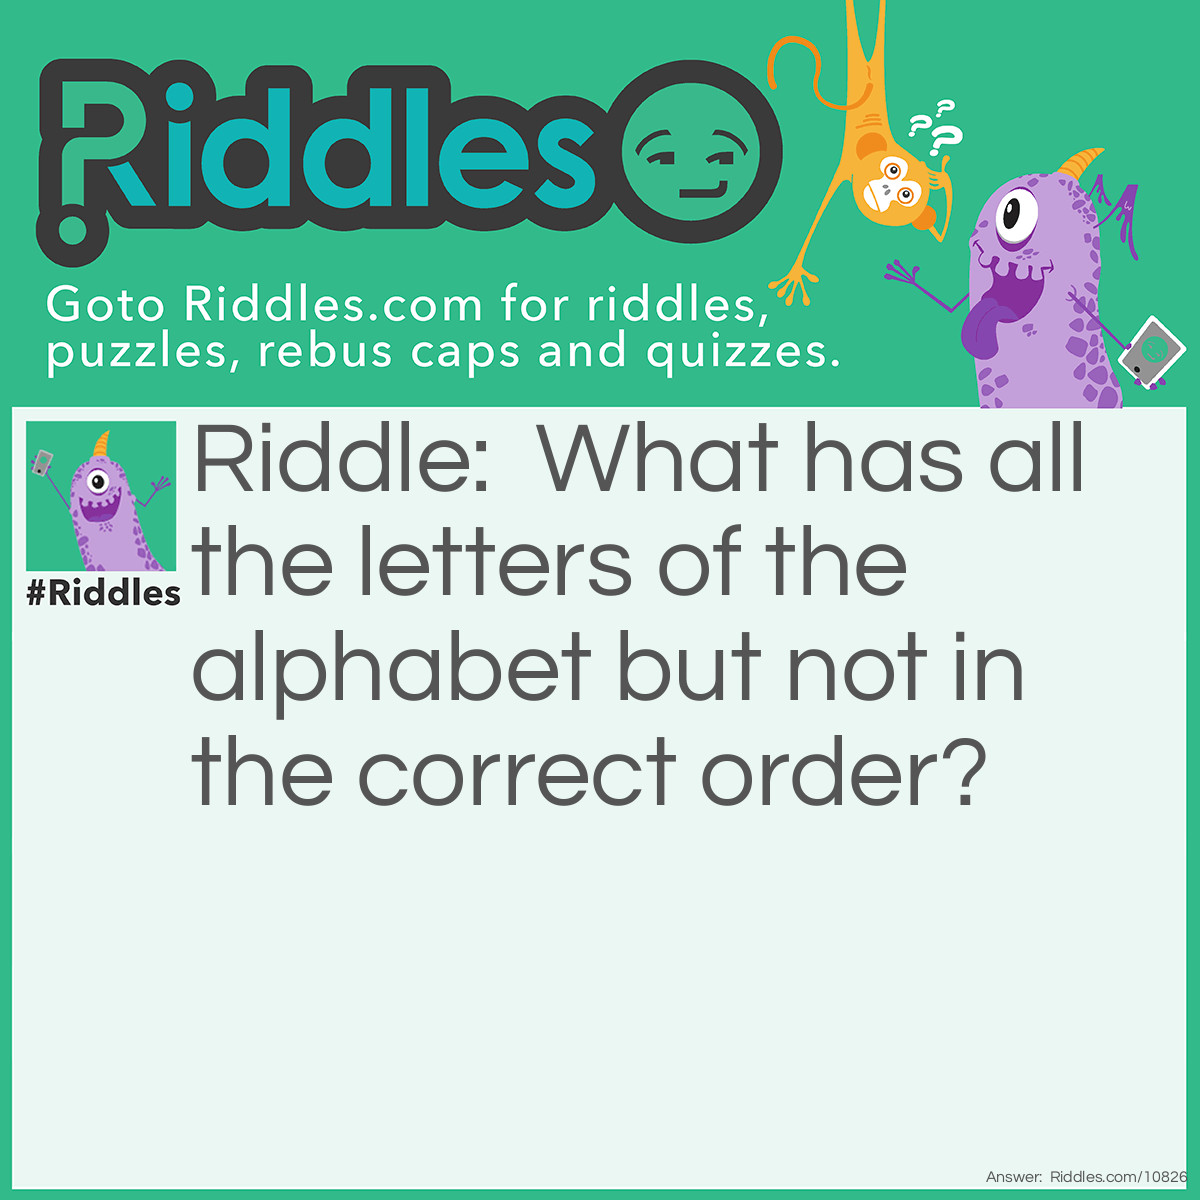 Riddle: What has all the letters of the alphabet but not in the correct order? Answer: A keyboard!